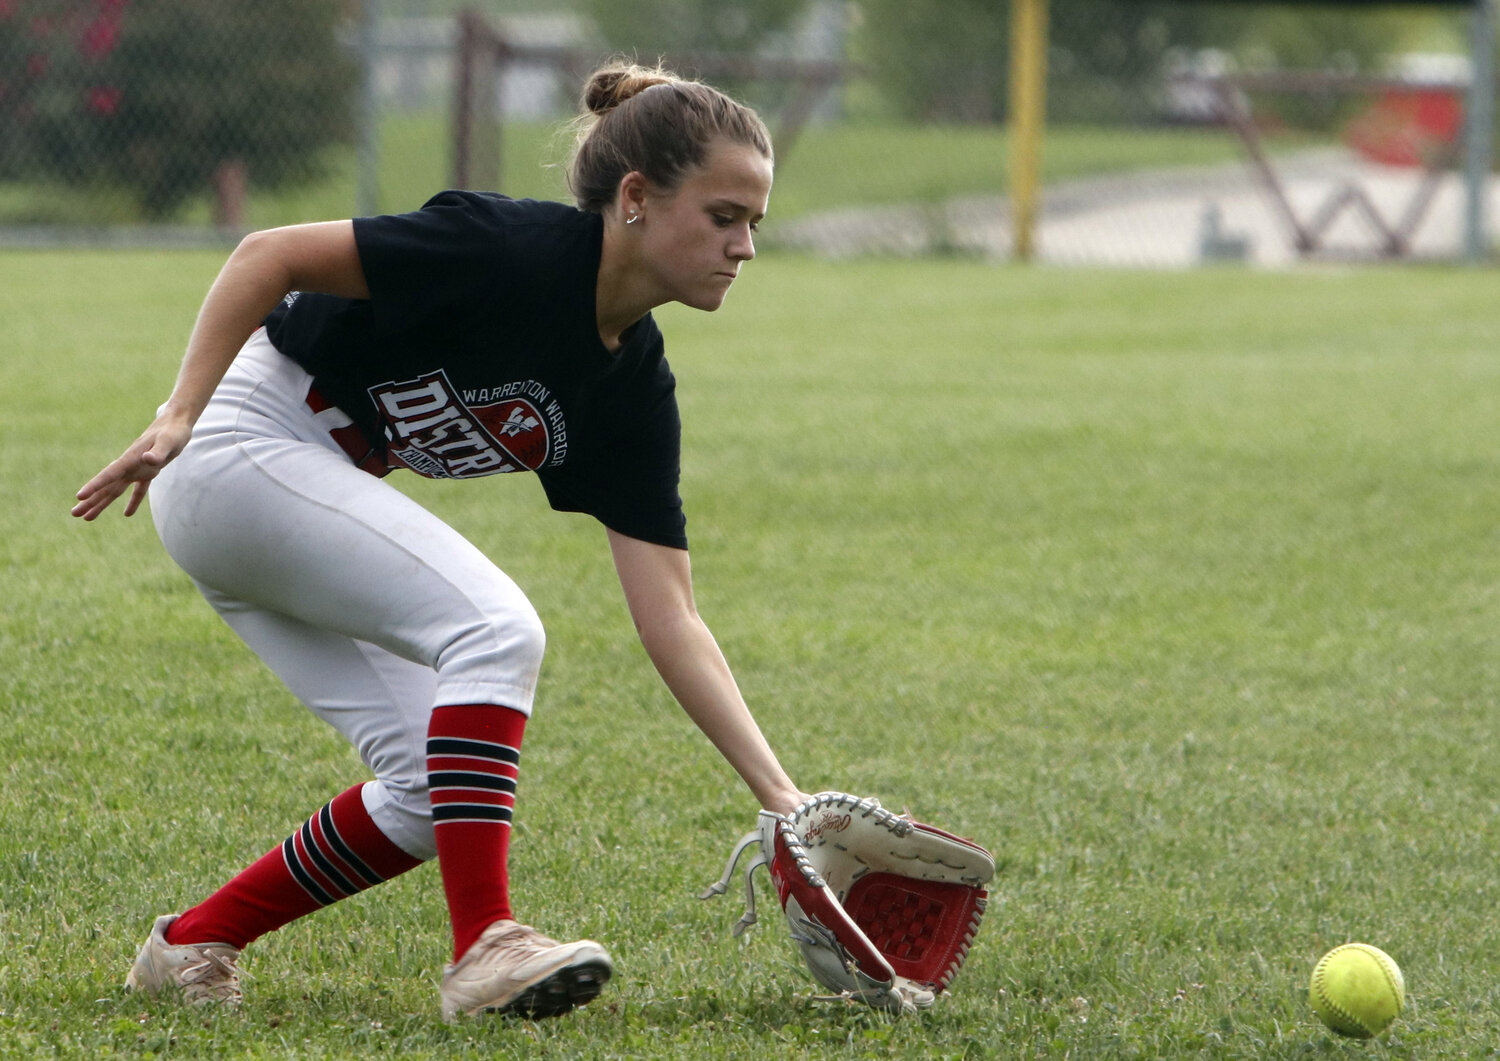 Grace Steinhoff runs towards the ball during outfield drills at an August practice.